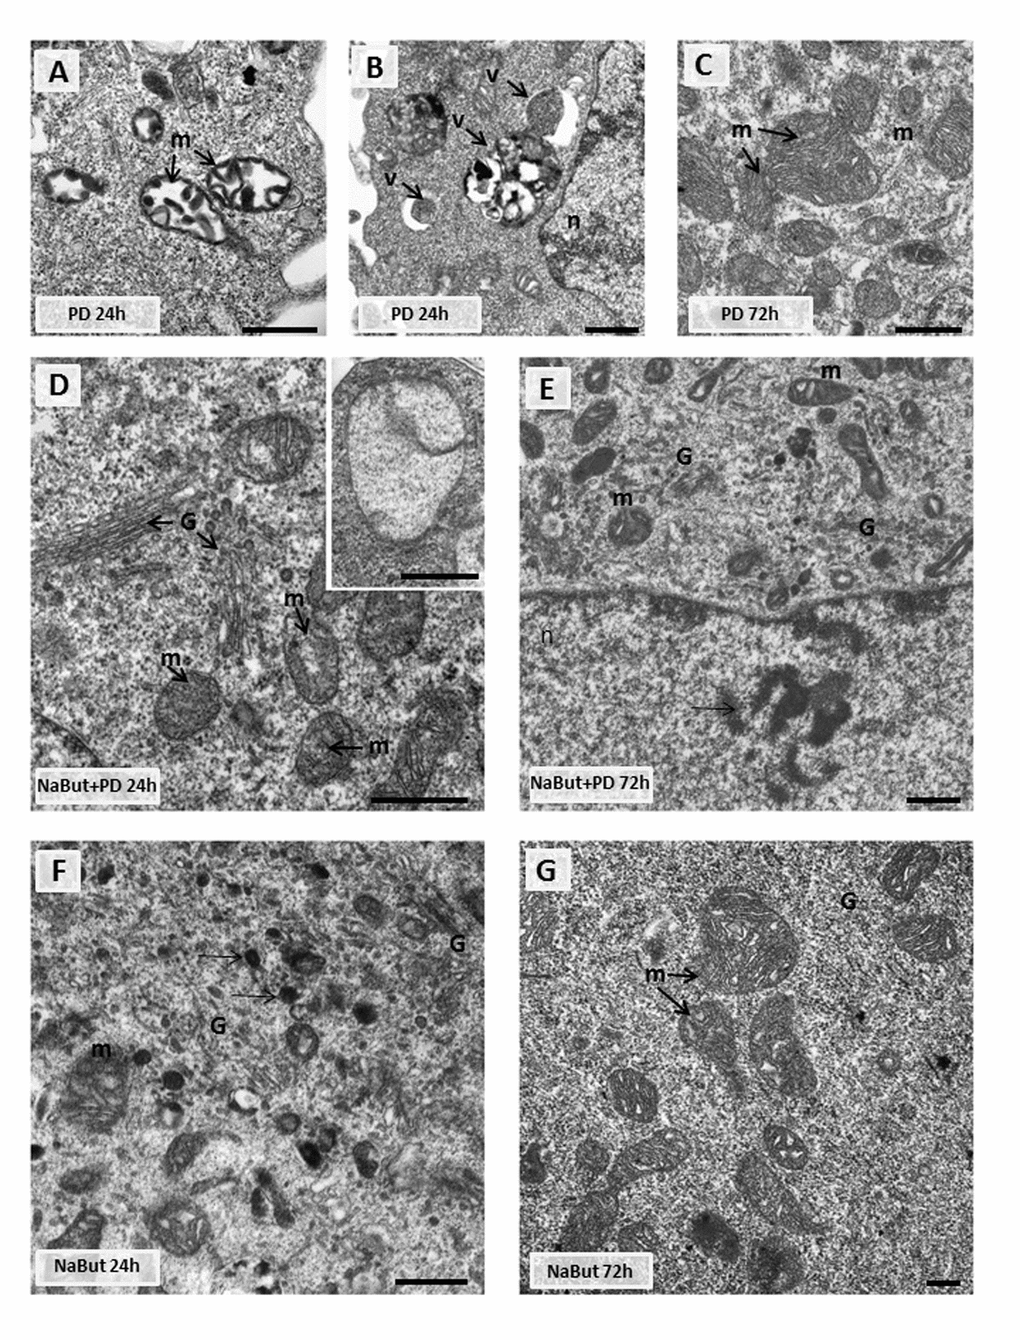 Transmission electron microscopy (TEM) images showing the ultrastructure of intact and senescent ERas cells treated with inhibitor of MEK/ERK-pathway (A,B,C). Representative images of the mitochondria in intact ERas cells after MEK/ERK suppression. Note severe alterations of mitochondria (m) after 24 hours of treatment (A), mitochondria in autophagosome-like vesicles (B) and normal-looking mitochondria after 72 hours of treatment (C). (D) Representative image of senescent ERas cell treated with PD for 24 hours. It contains well-developed Golgi apparatus (G) and mitochondria (m) with rare cristae. Inset: mitochondria with complete loss of the cristae and the preserved double-membrane envelope. (E) Representative image of senescent ERas cell treated with PD for 72 hours. The cell contains well-developed Golgi apparatus and swollen mitochondria with vacuolar structure. Note poorly developed nucleoli (arrow). The senescent ERas cells after 24 (F) and 72 (G) hours of NaBut exposure. Stacks of Golgi cisternae and lysosome-like structures (F, arrows) can be seen. Designations: G, Golgi; m, mitochondria; n, nucleus; v, vesicle. Scale bars: 500 nm.